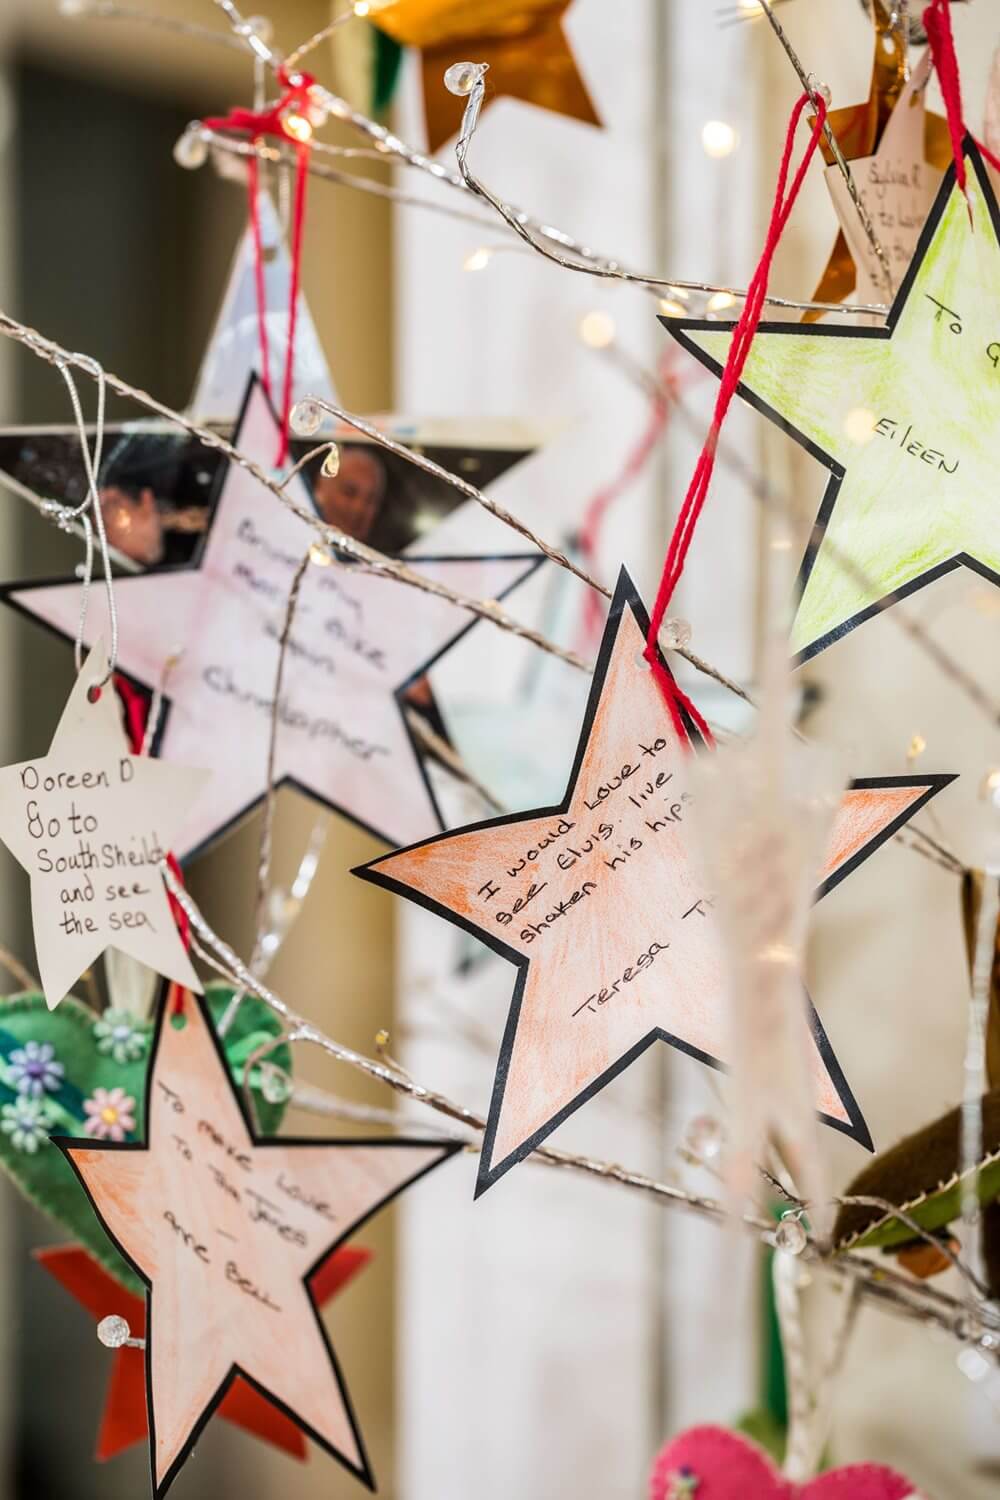 Armstrong House - Armstrong House wishing tree